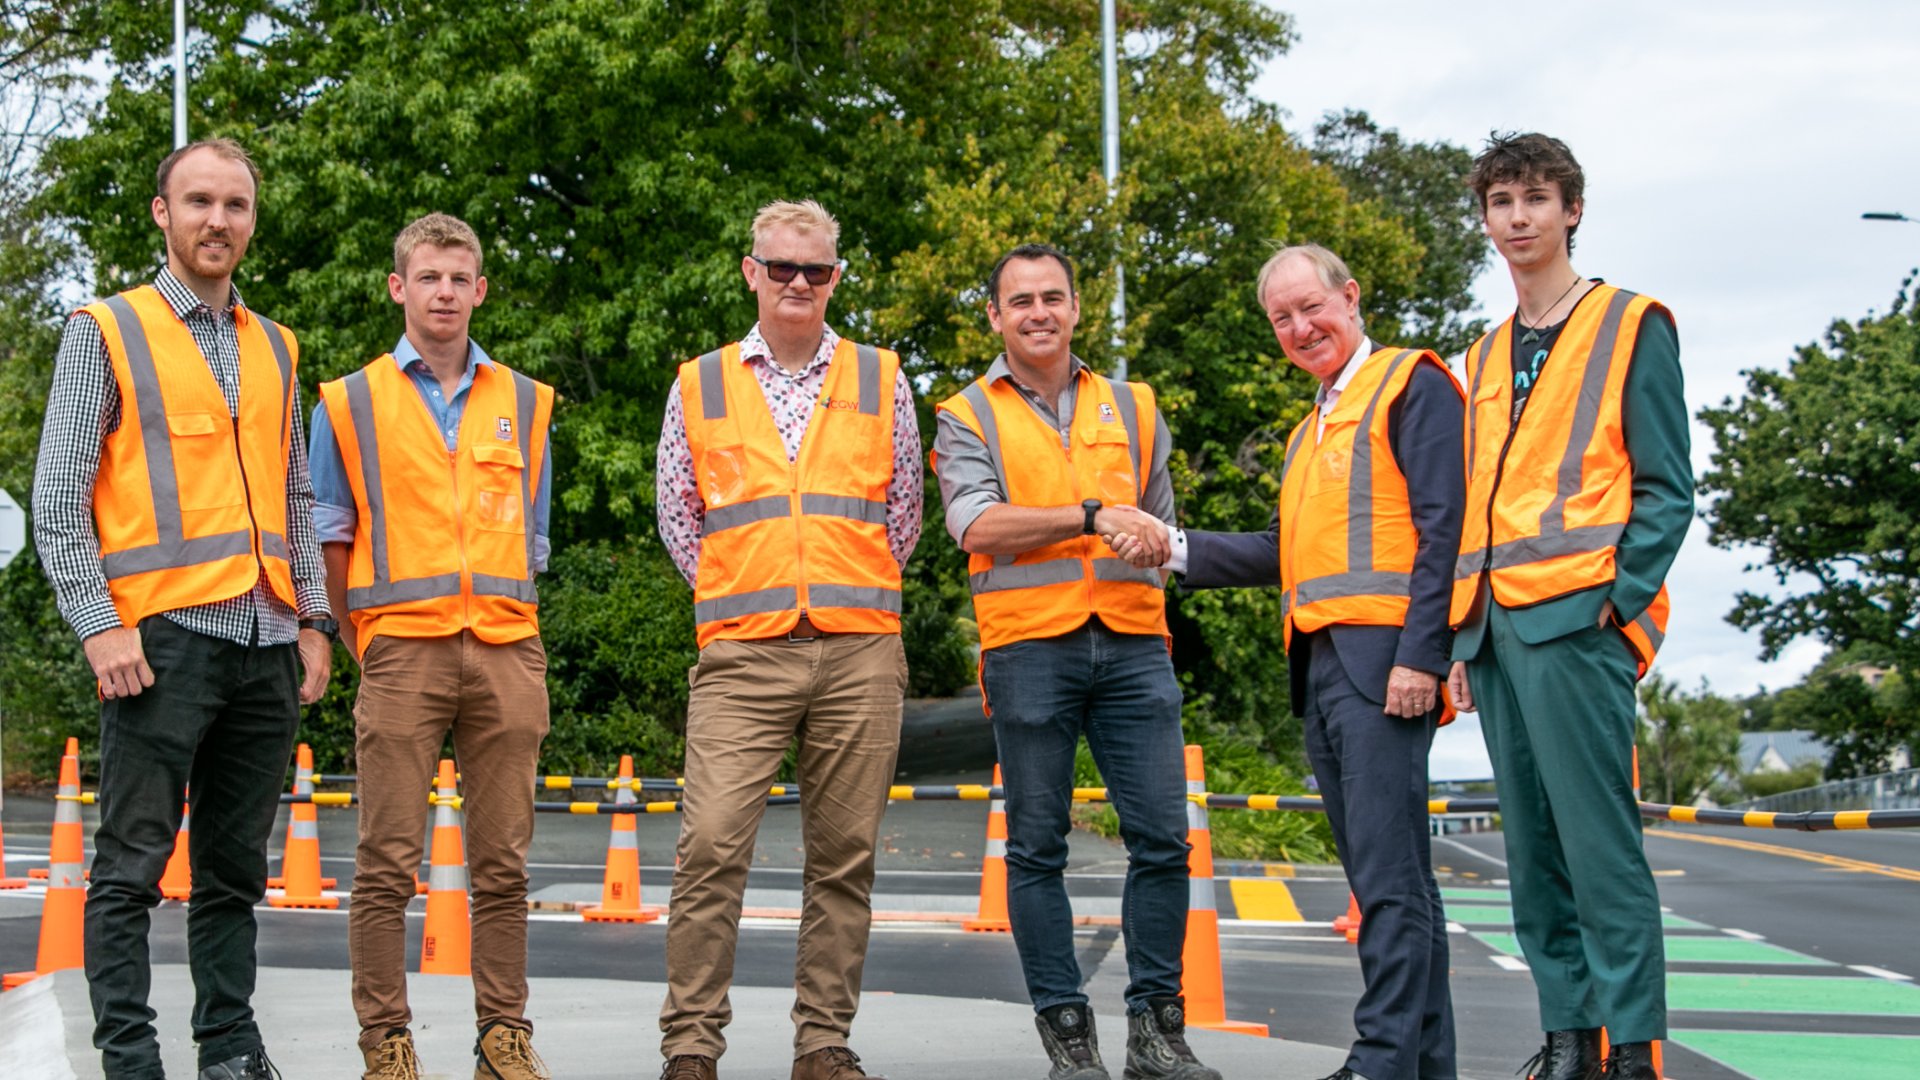 From left: Nelson City Council Project Manager Cameron Ford, Fulton Hogan Project Manager Josh Turner, CGW Director - Land and Infrastructure Rowan Puklowski, Fulton Hogan Executive Divisional Manager Eamon Powick, Nelson Mayor Nick Smith, Nelson Deputy Mayor Rohan O'Neill-Stevens